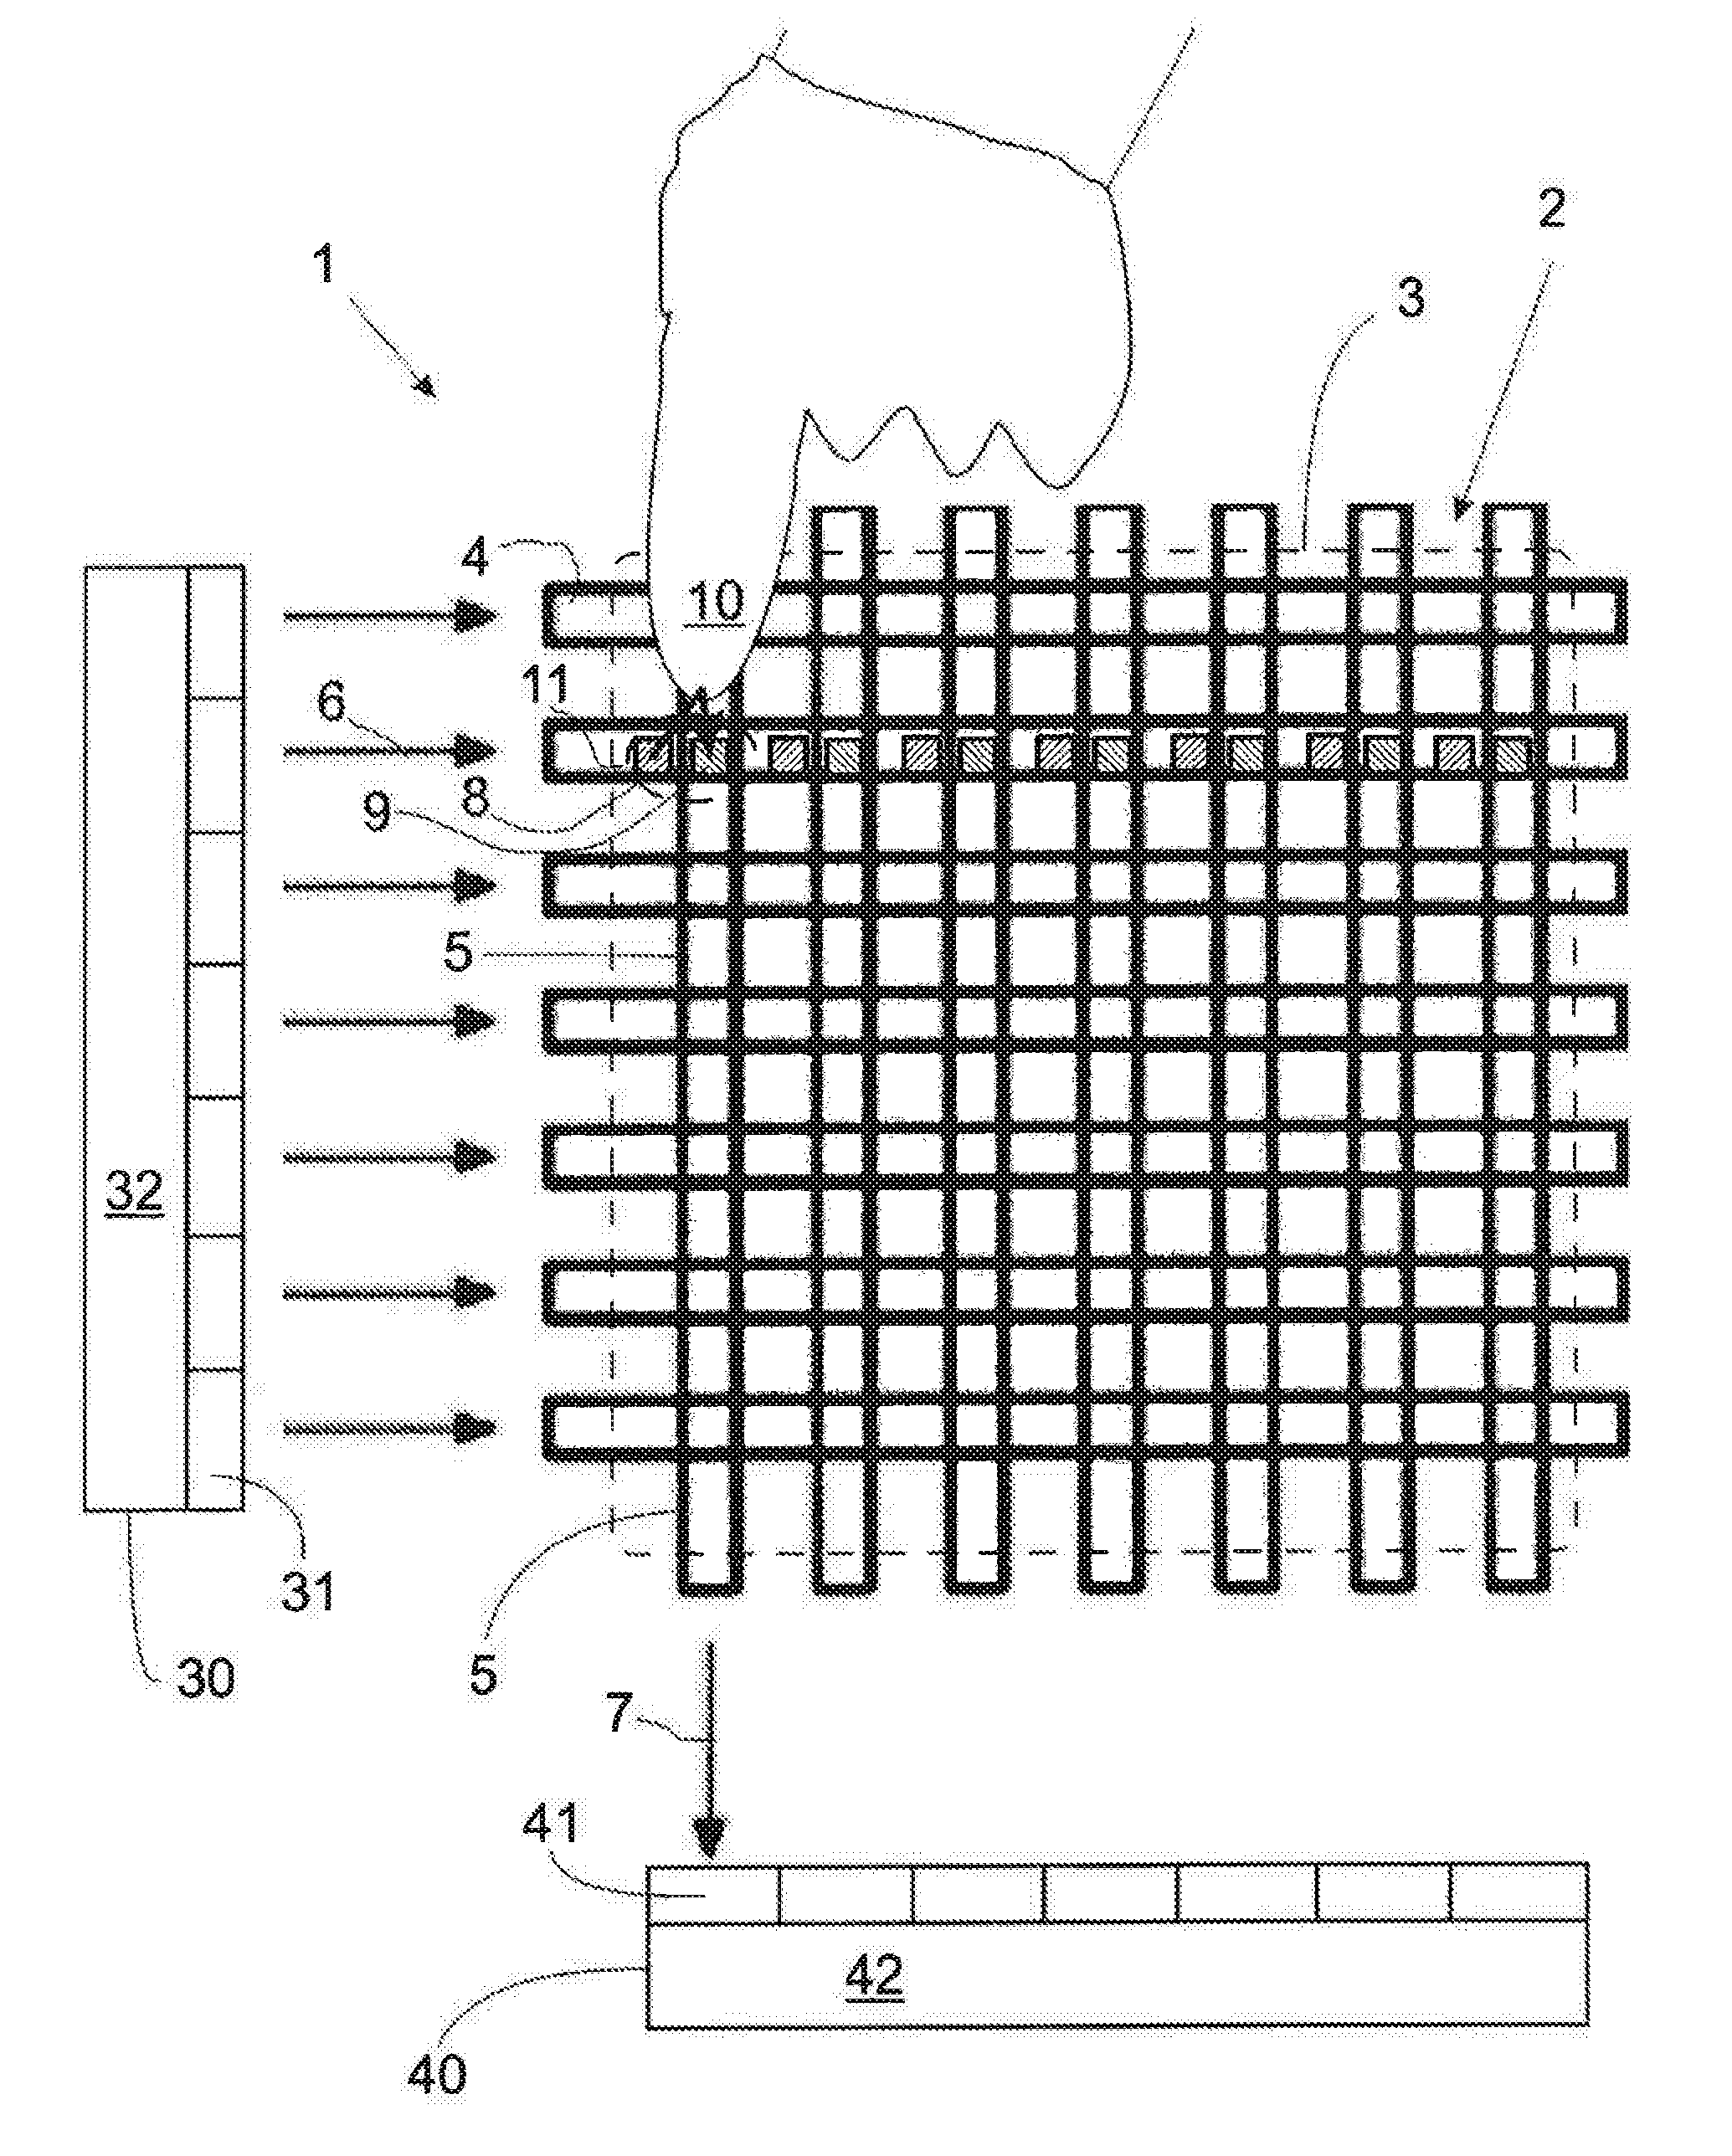 Light guide assembly for optical touch sensing, and method for detecting a touch